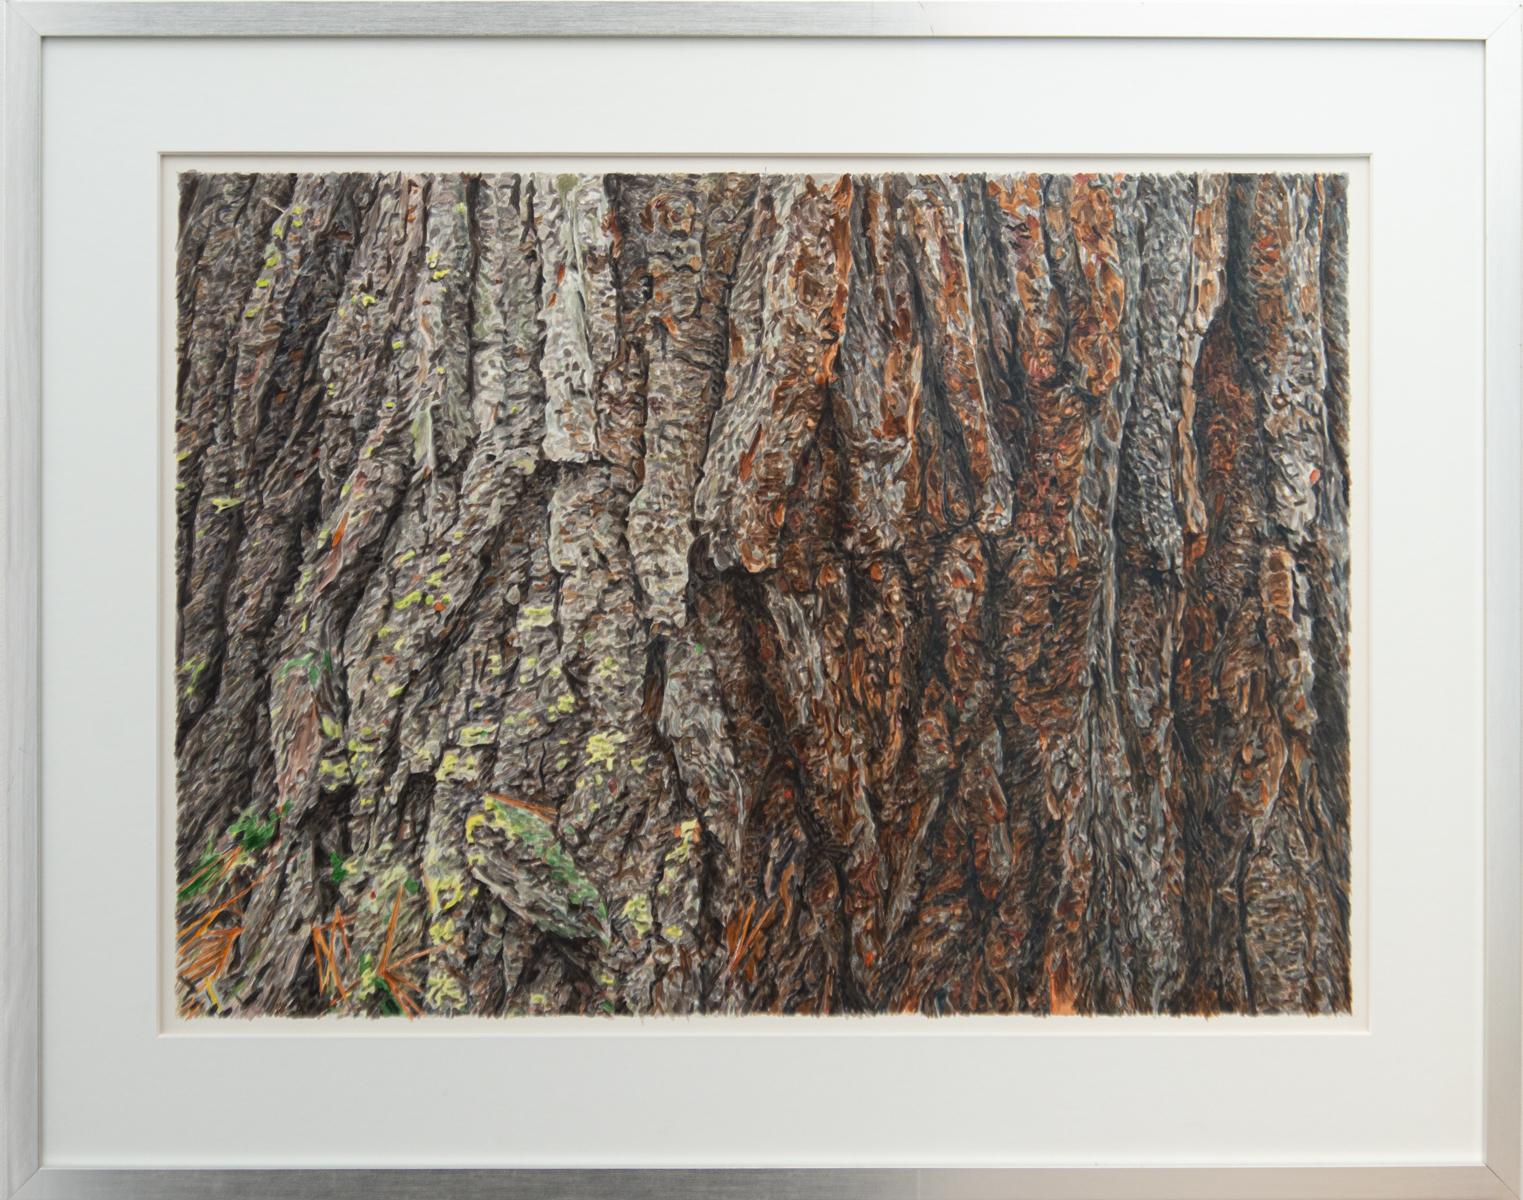 White Pine - detailed, natural, realism, tree portrait, watercolor on paper - Painting by Robert Wiens